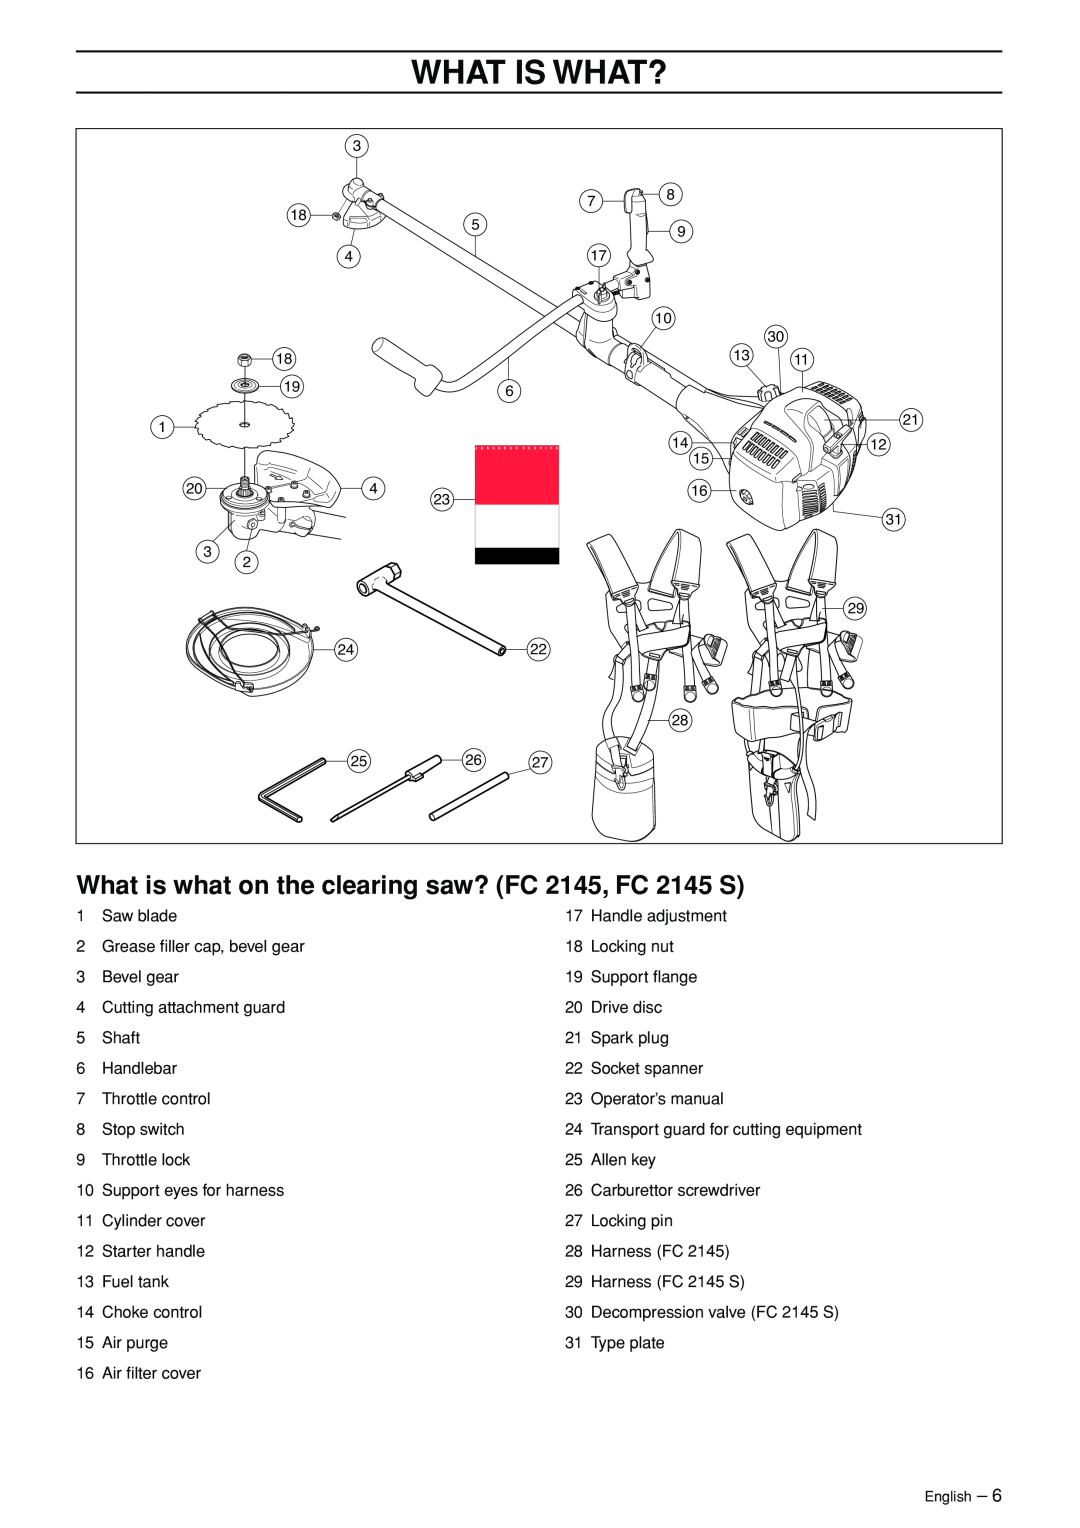 Jonsered FC 2145S manual What is what on the clearing saw? FC 2145, FC 2145 S, What Is What? 